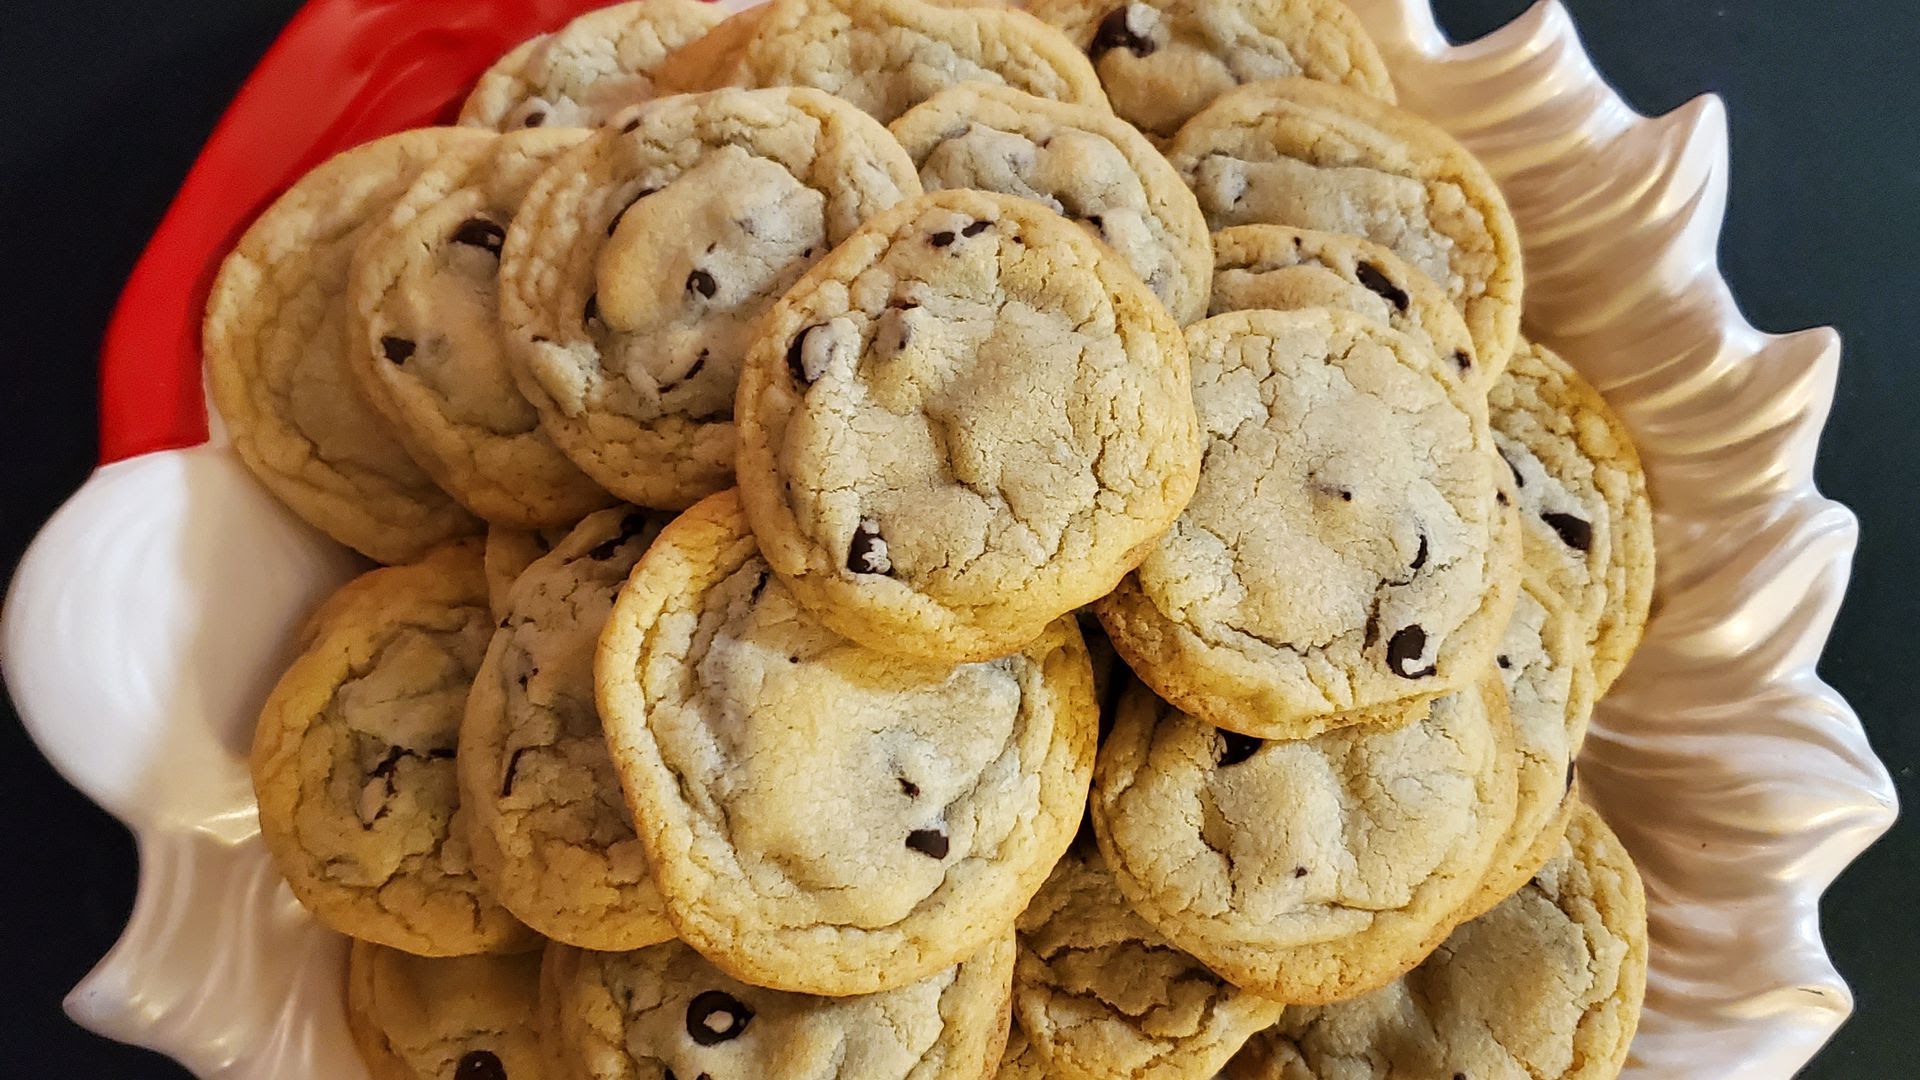 This stack of delicious chocolate chip cookies didn't last long.